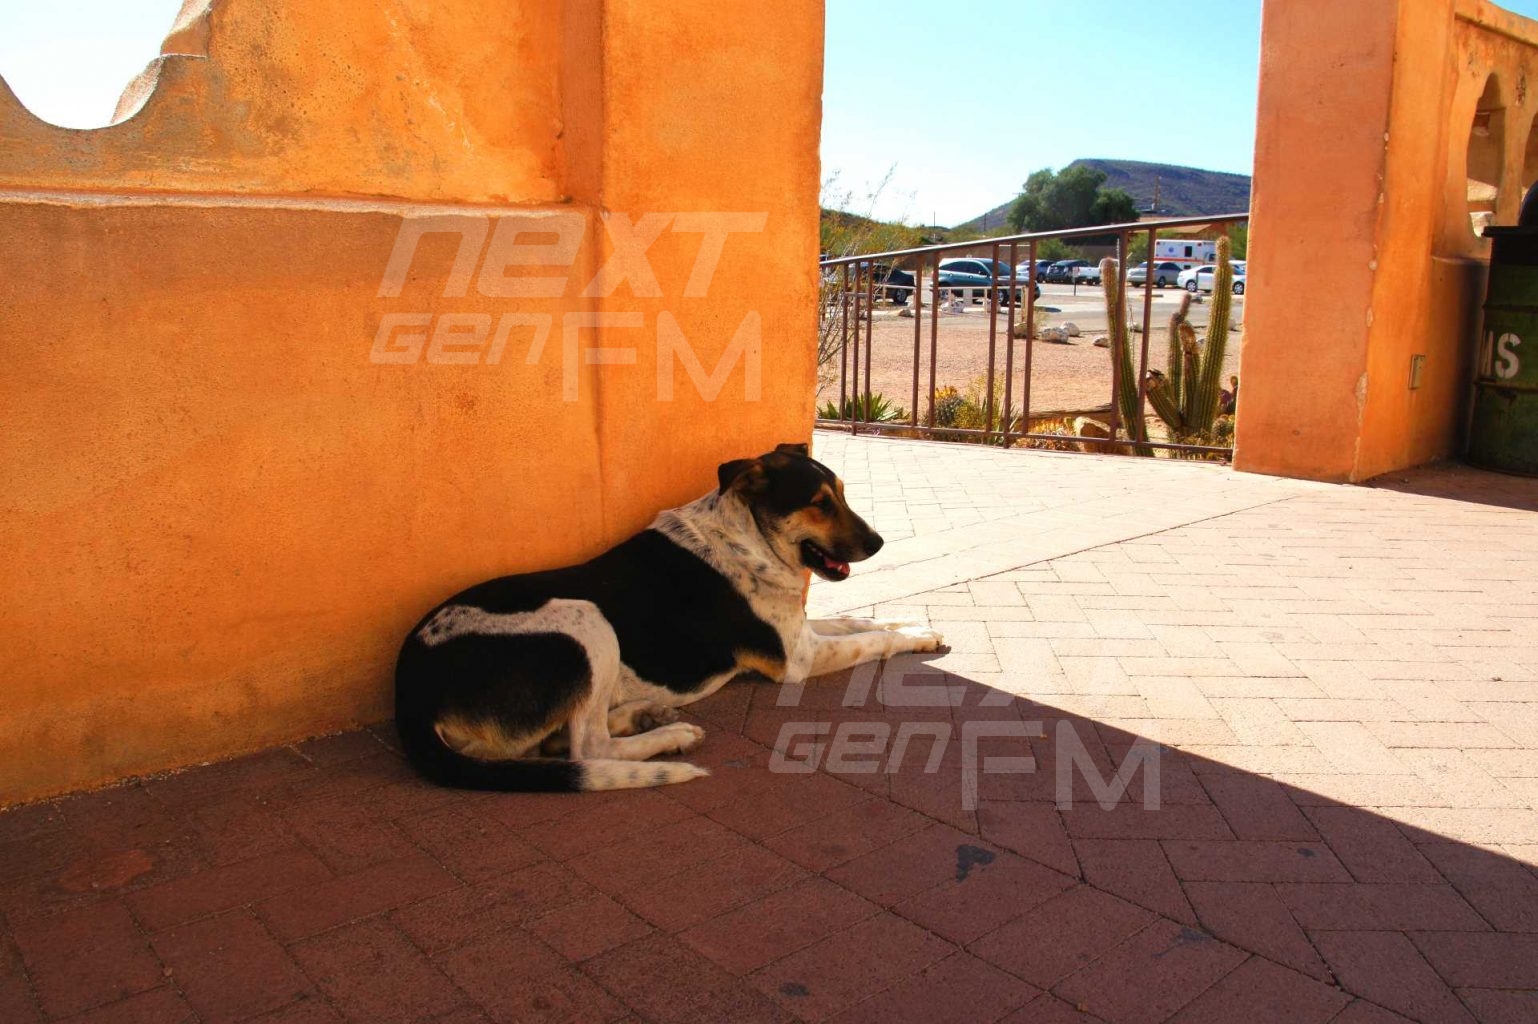 A dog takes a break from the hot Arizona sun in the shade of the church.